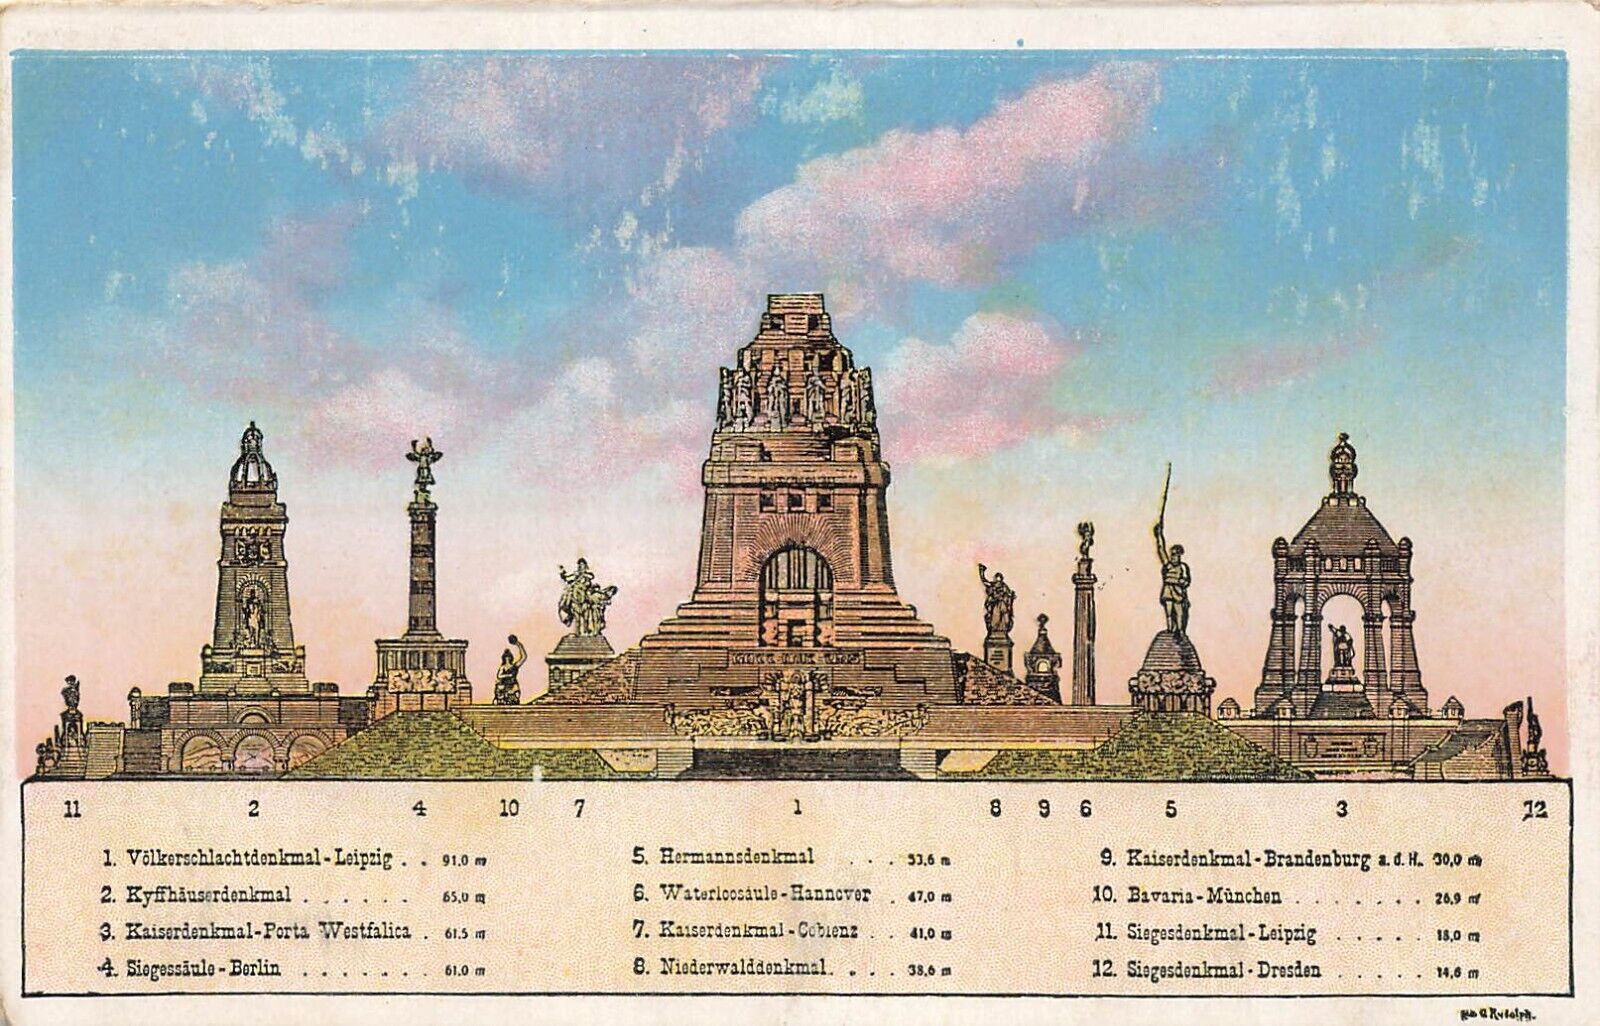 Leipzig Saxony~Monuments of Germany, Battle of the Nations Monument~POSTCARD